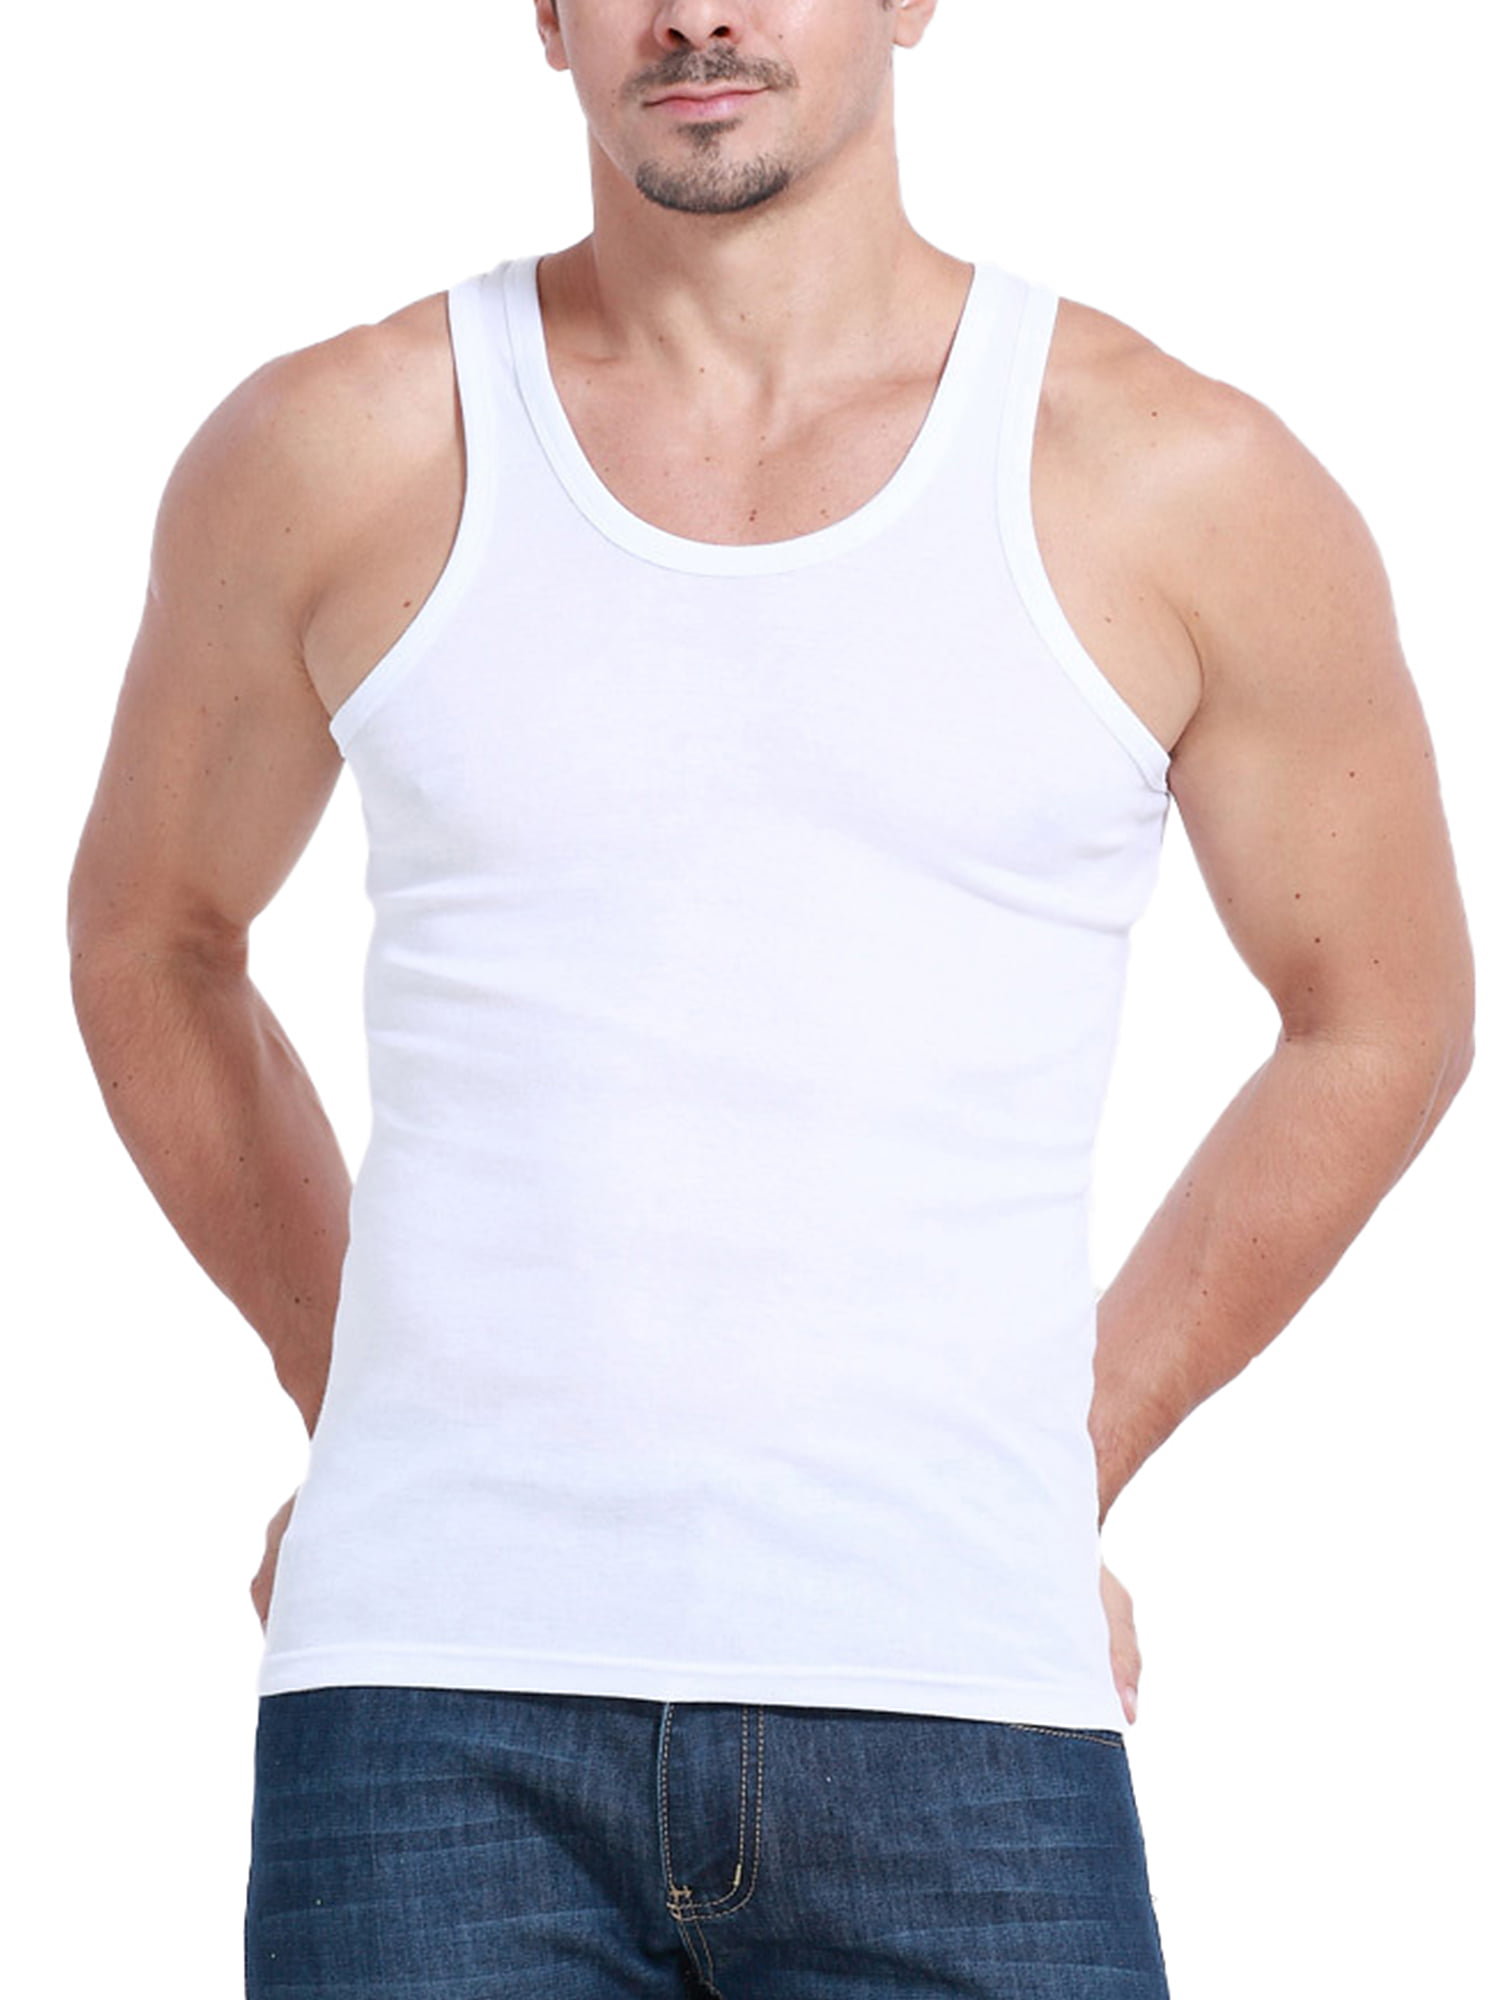 HETHCODE Men's Classic Basic Athletic Gym Jersey Vests Tank Top Casual T Shirts